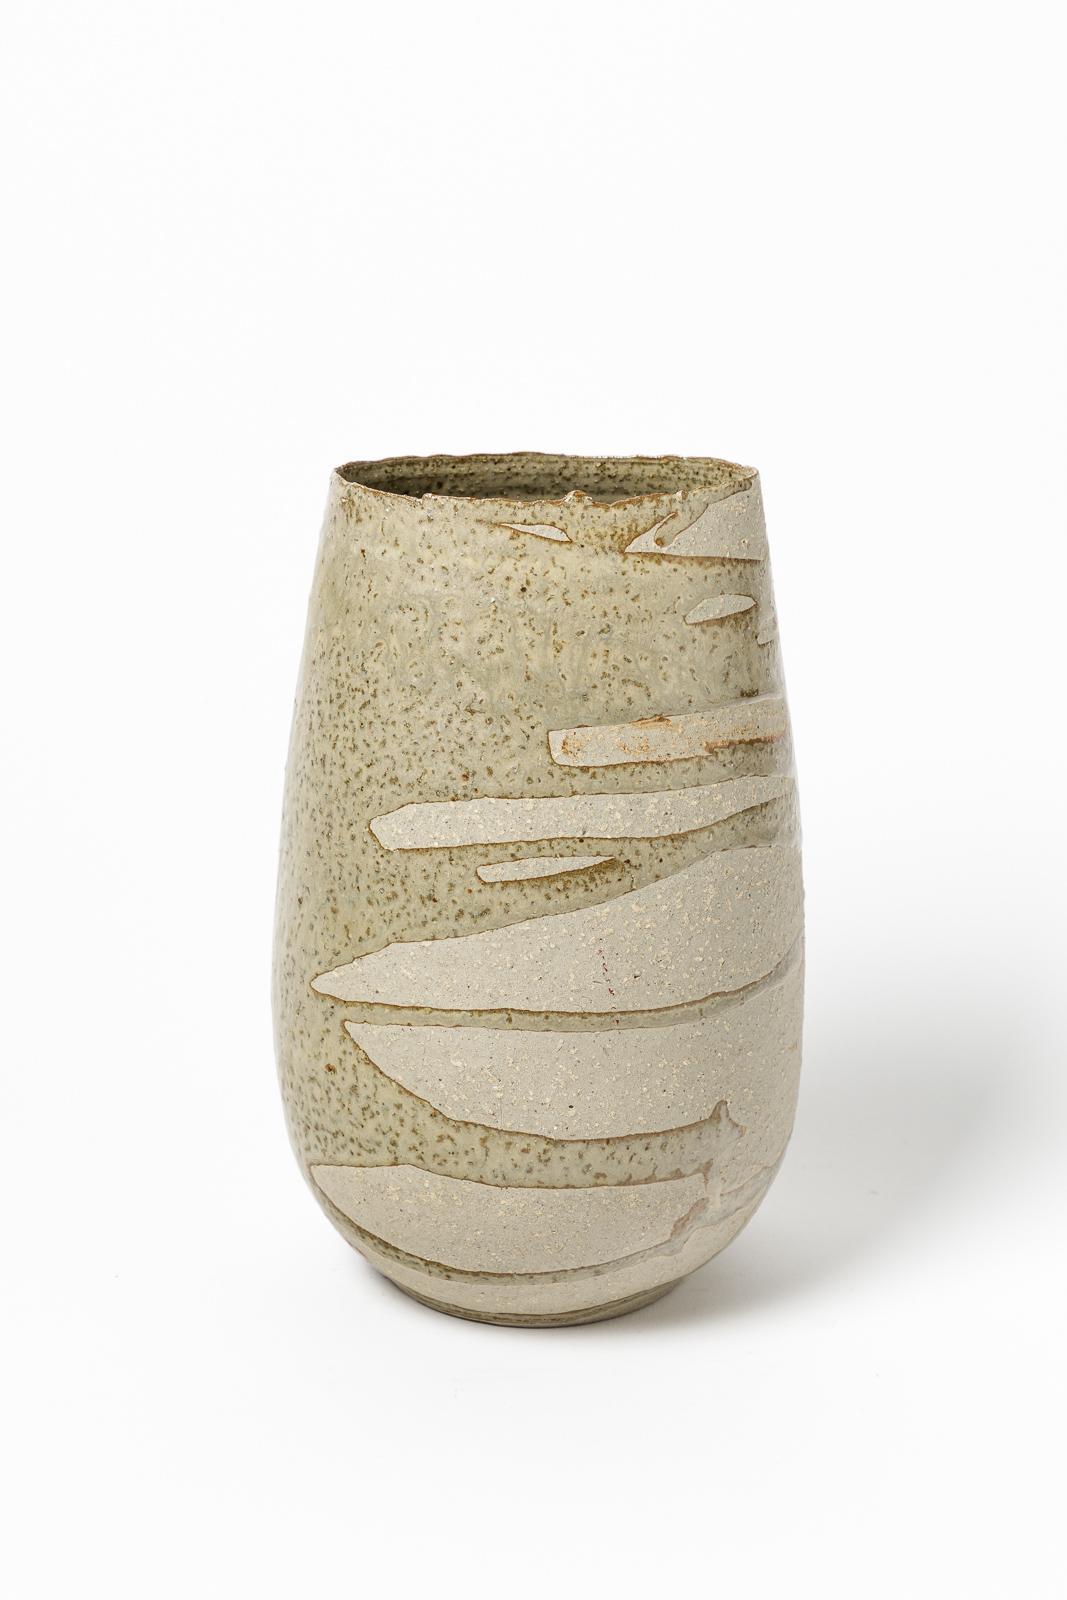 Jacques Lacheny (born in 1937)

Abstract stoneware ceramic vase by Jacques Lacheny realised circa 1970

Grey ceramic glazes colors

Original perfect condition

Signed under the base

Measures: Height 21 cm
Large 13 cm.